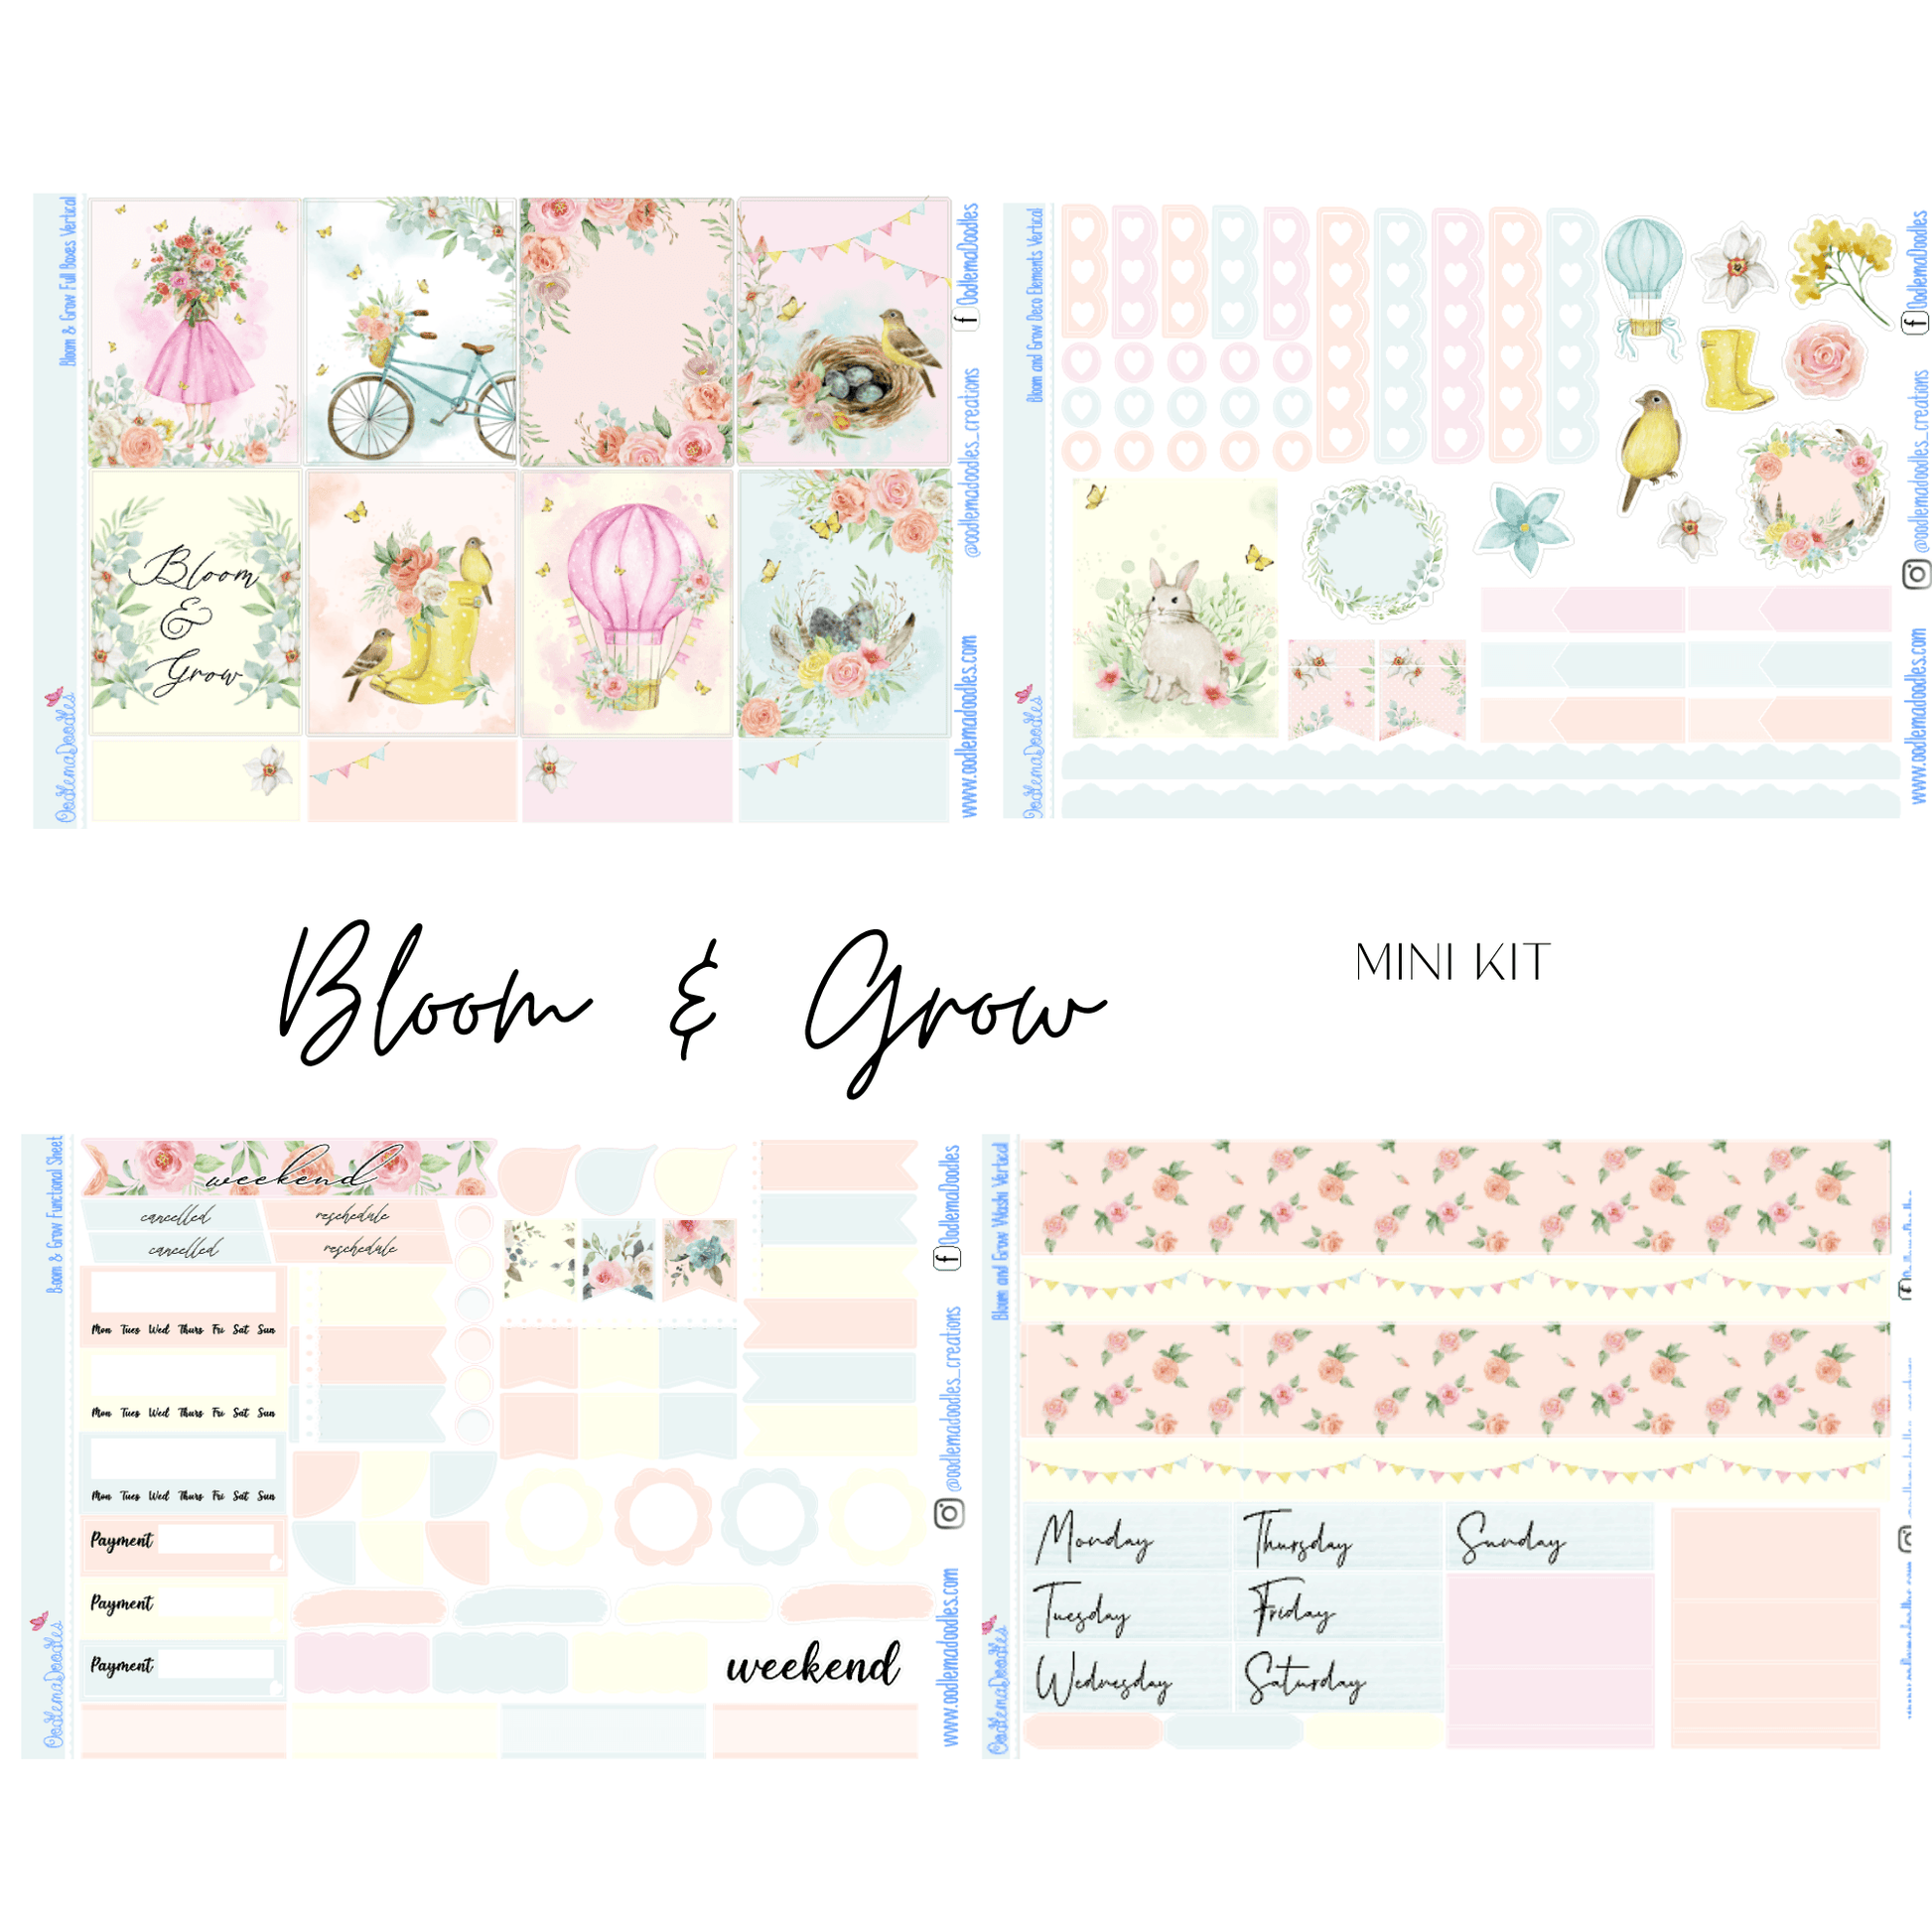 Bloom & Grow Mini Kit - oodlemadoodles